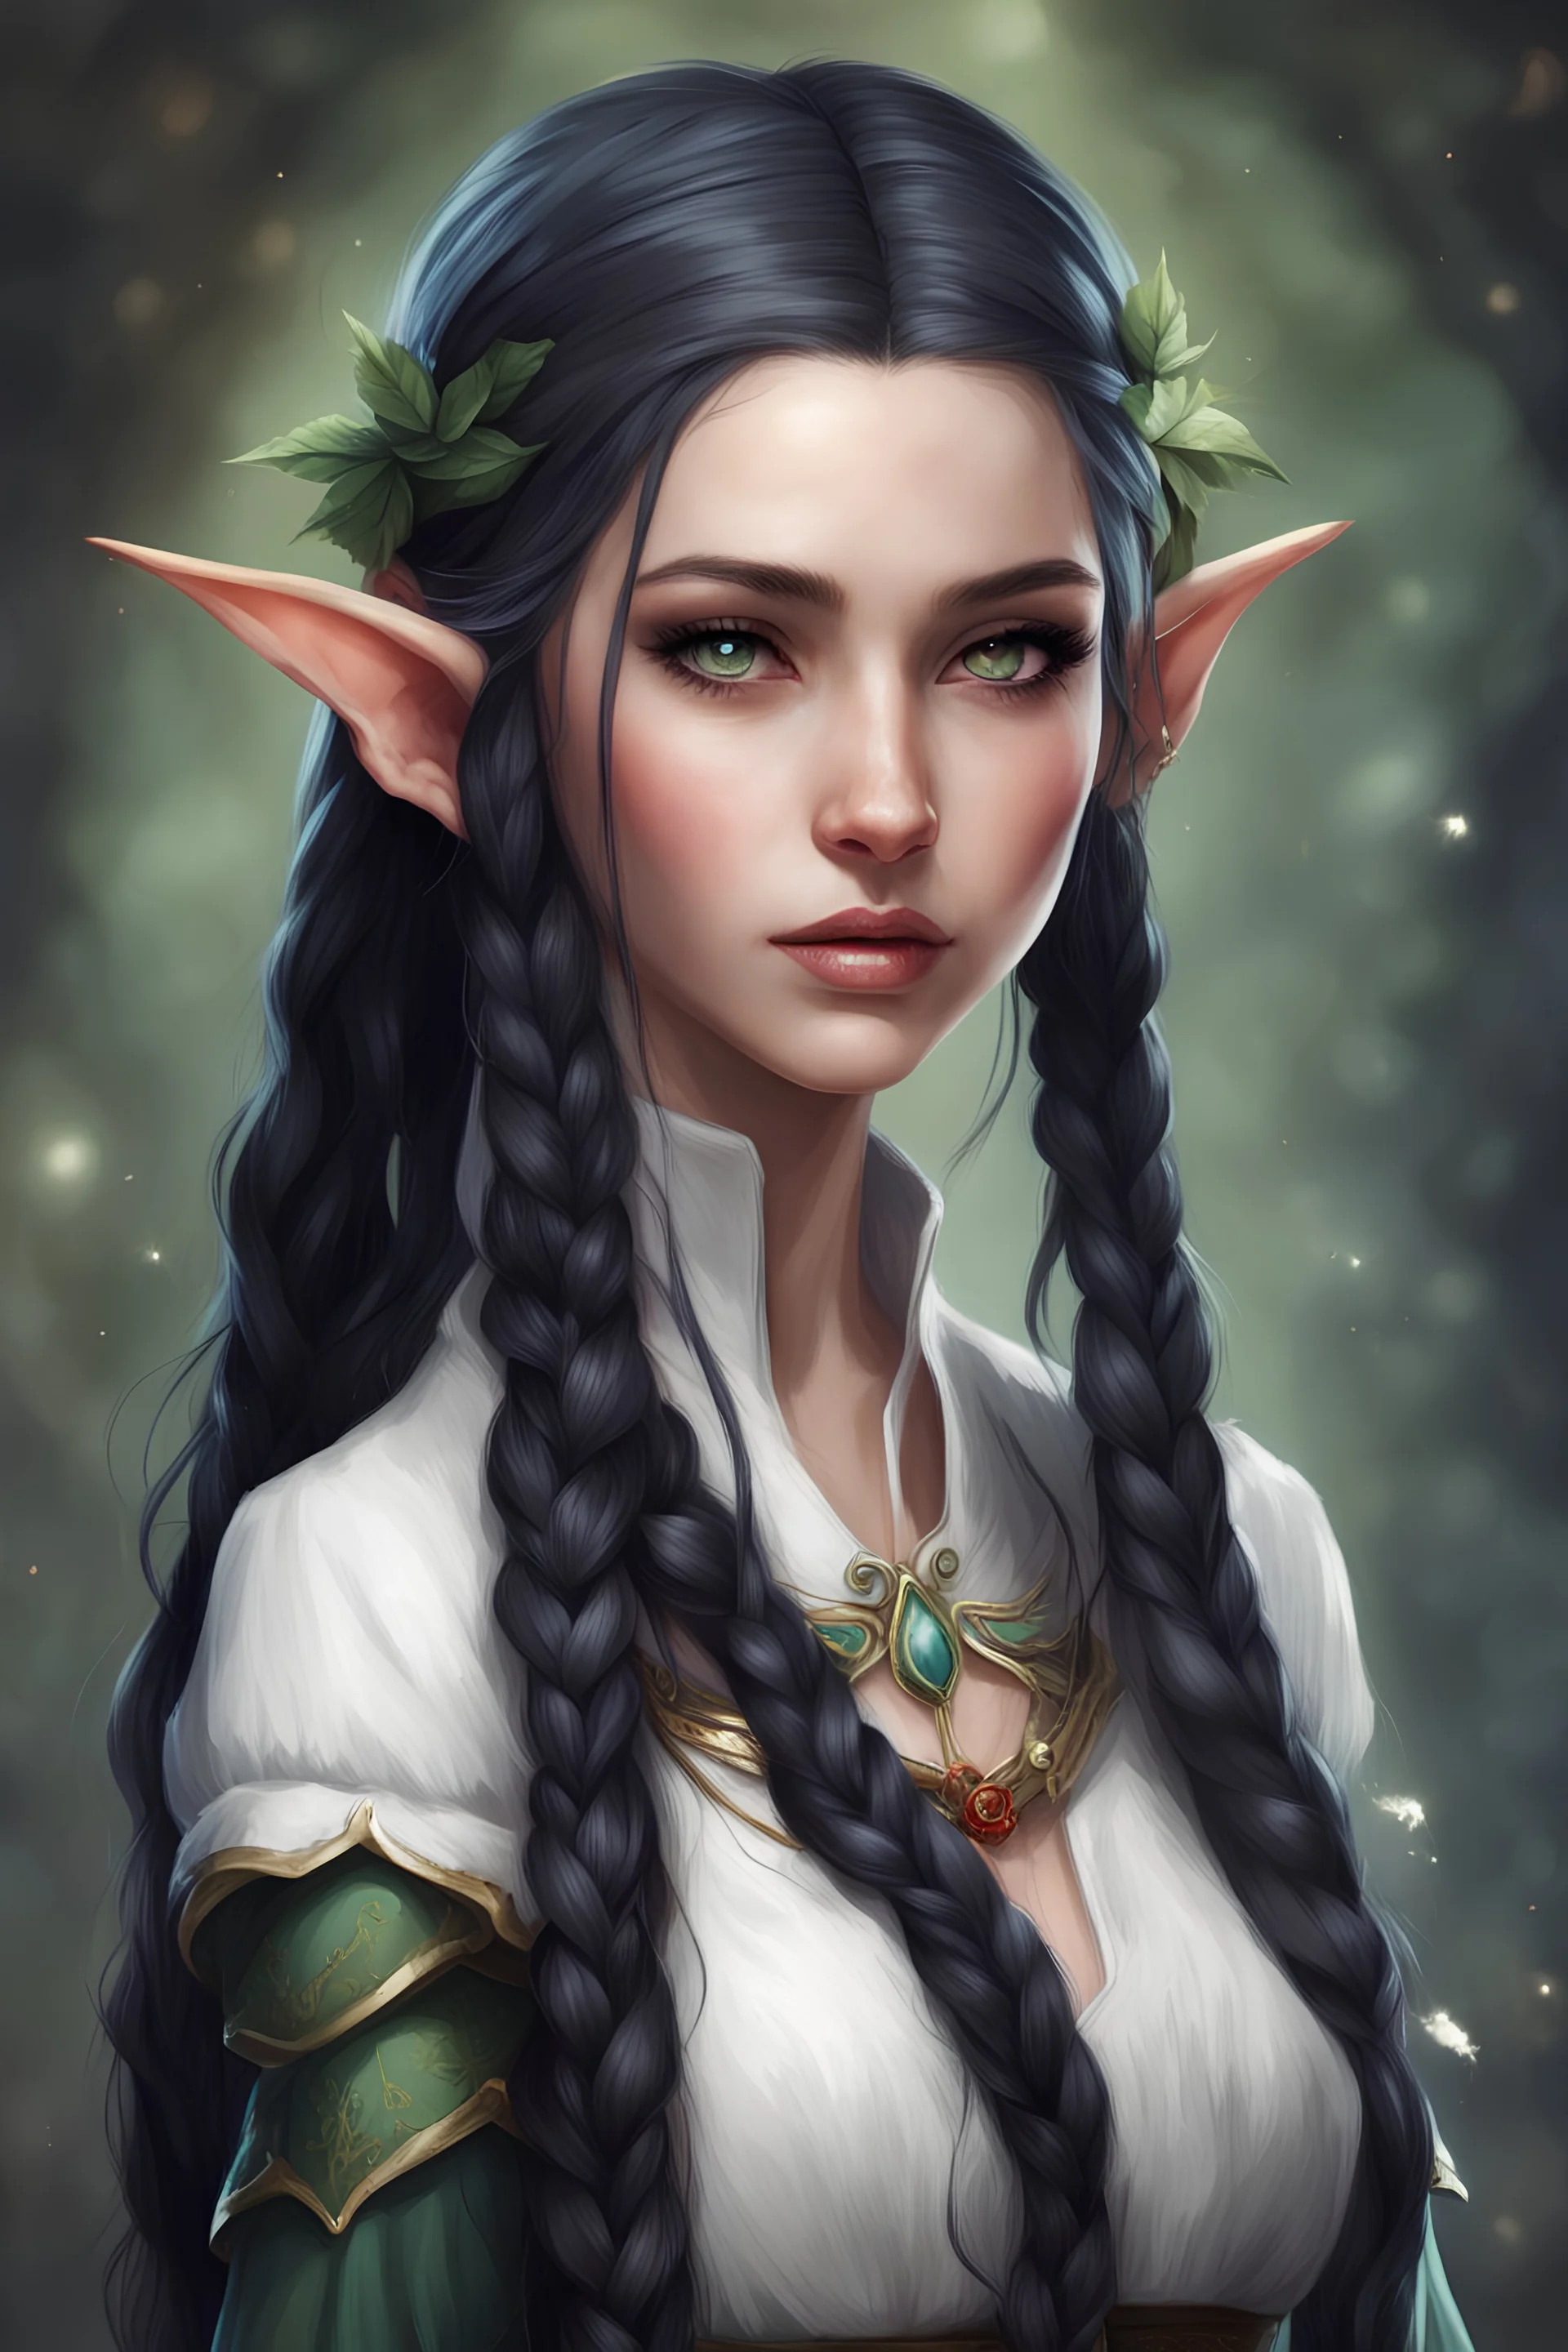 beautiful elf girl, with one long black braid, dressed in diplomatic attire